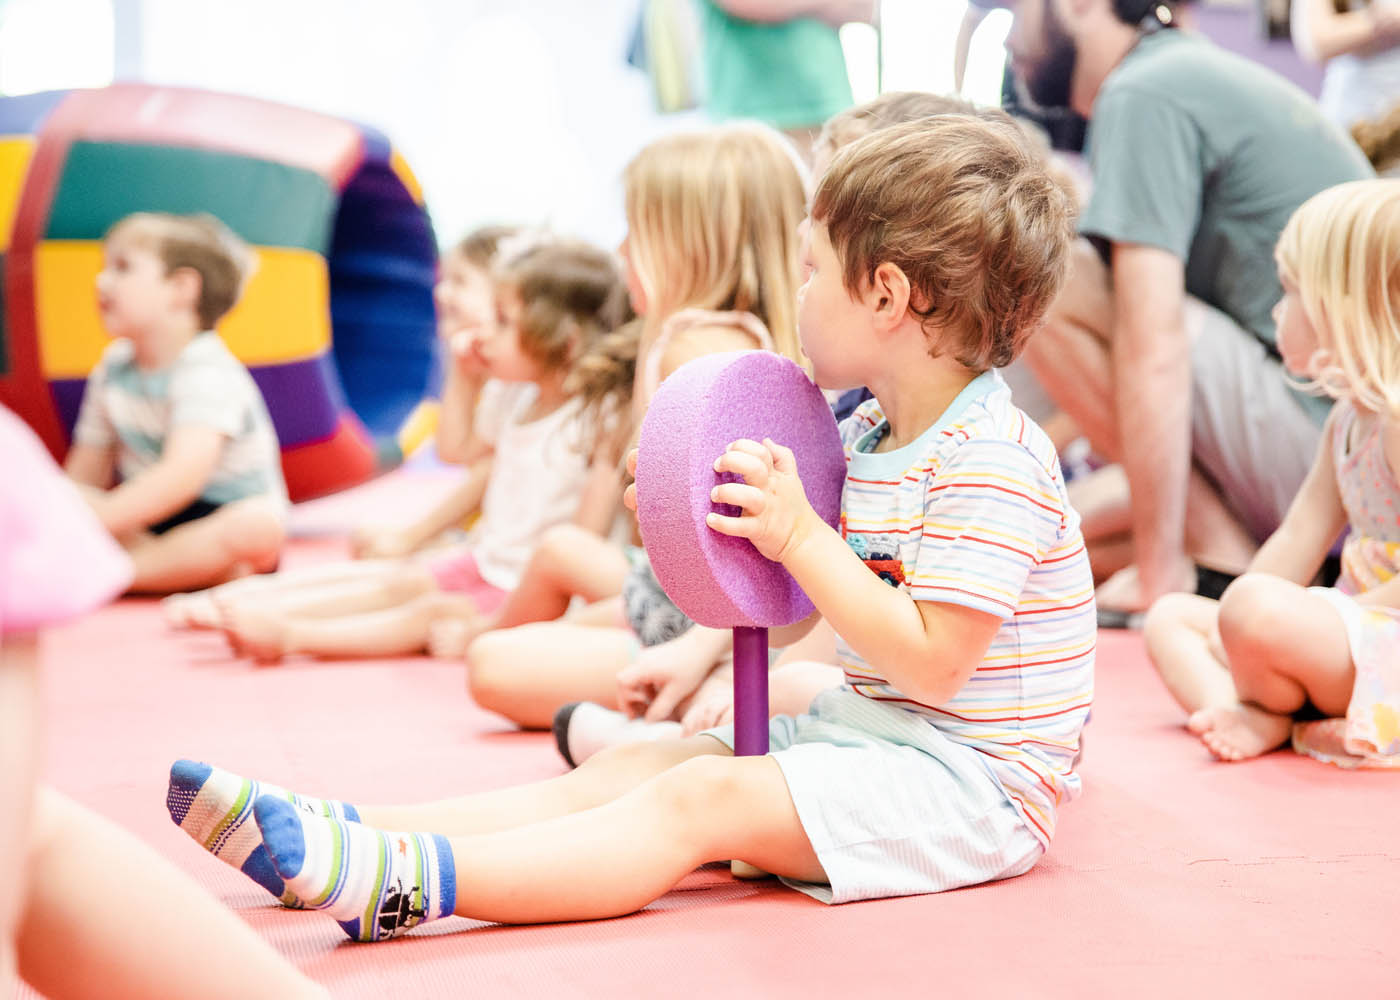 Romp n' Roll St. Petersburg baby and toddler classes in St. Petersburg, FL offers mixed age classes.